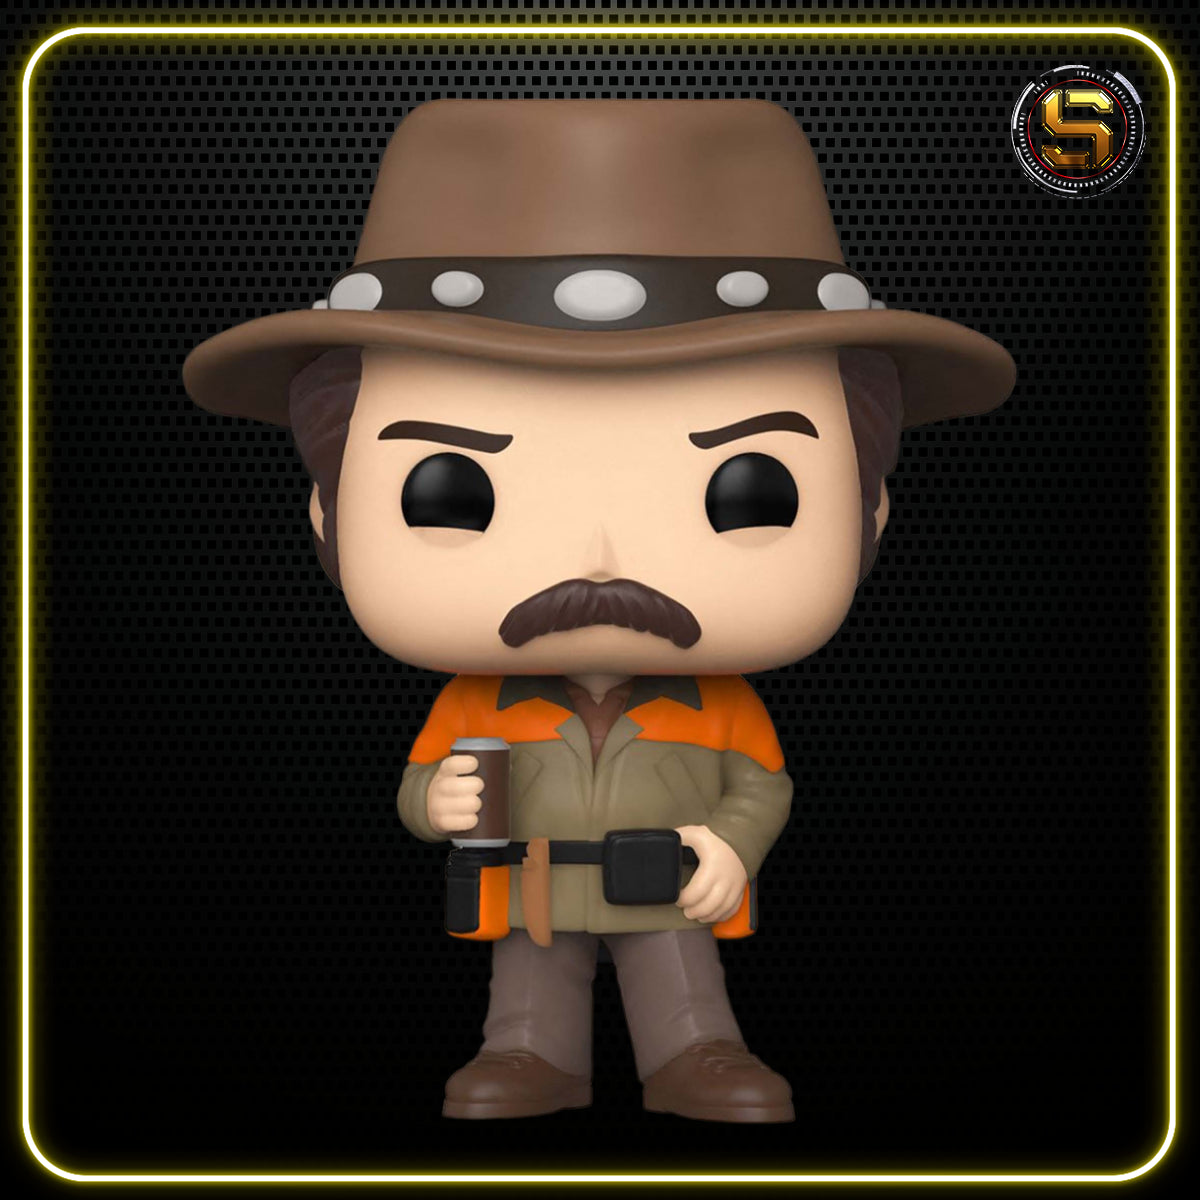 FUNKO POP TV PARKS AND RECREATION HUNTER RON 1150